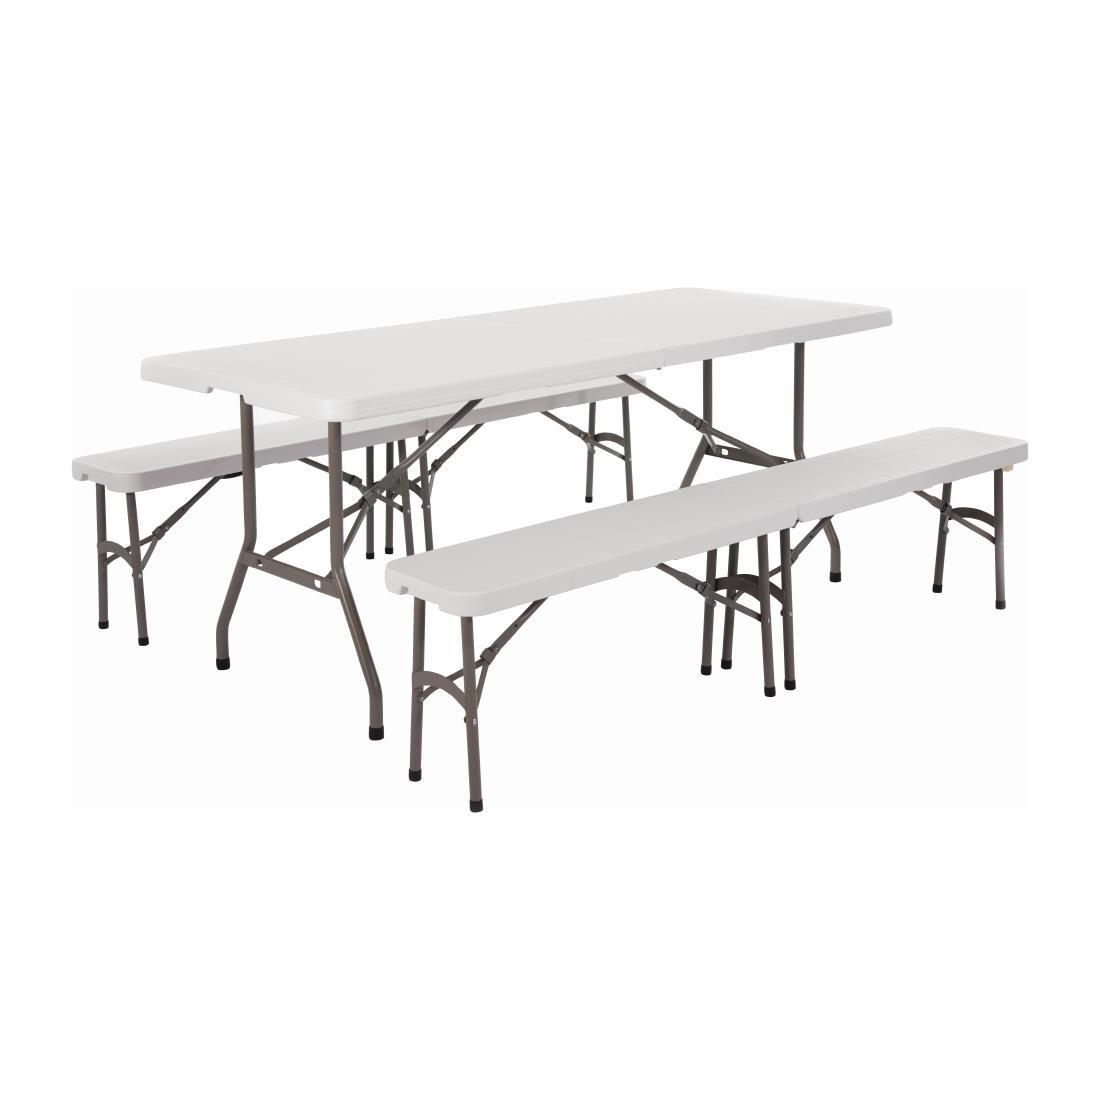 Special Offer Bolero PE Centre Folding Table 6ft with Two Folding Benches - SA425  - 1